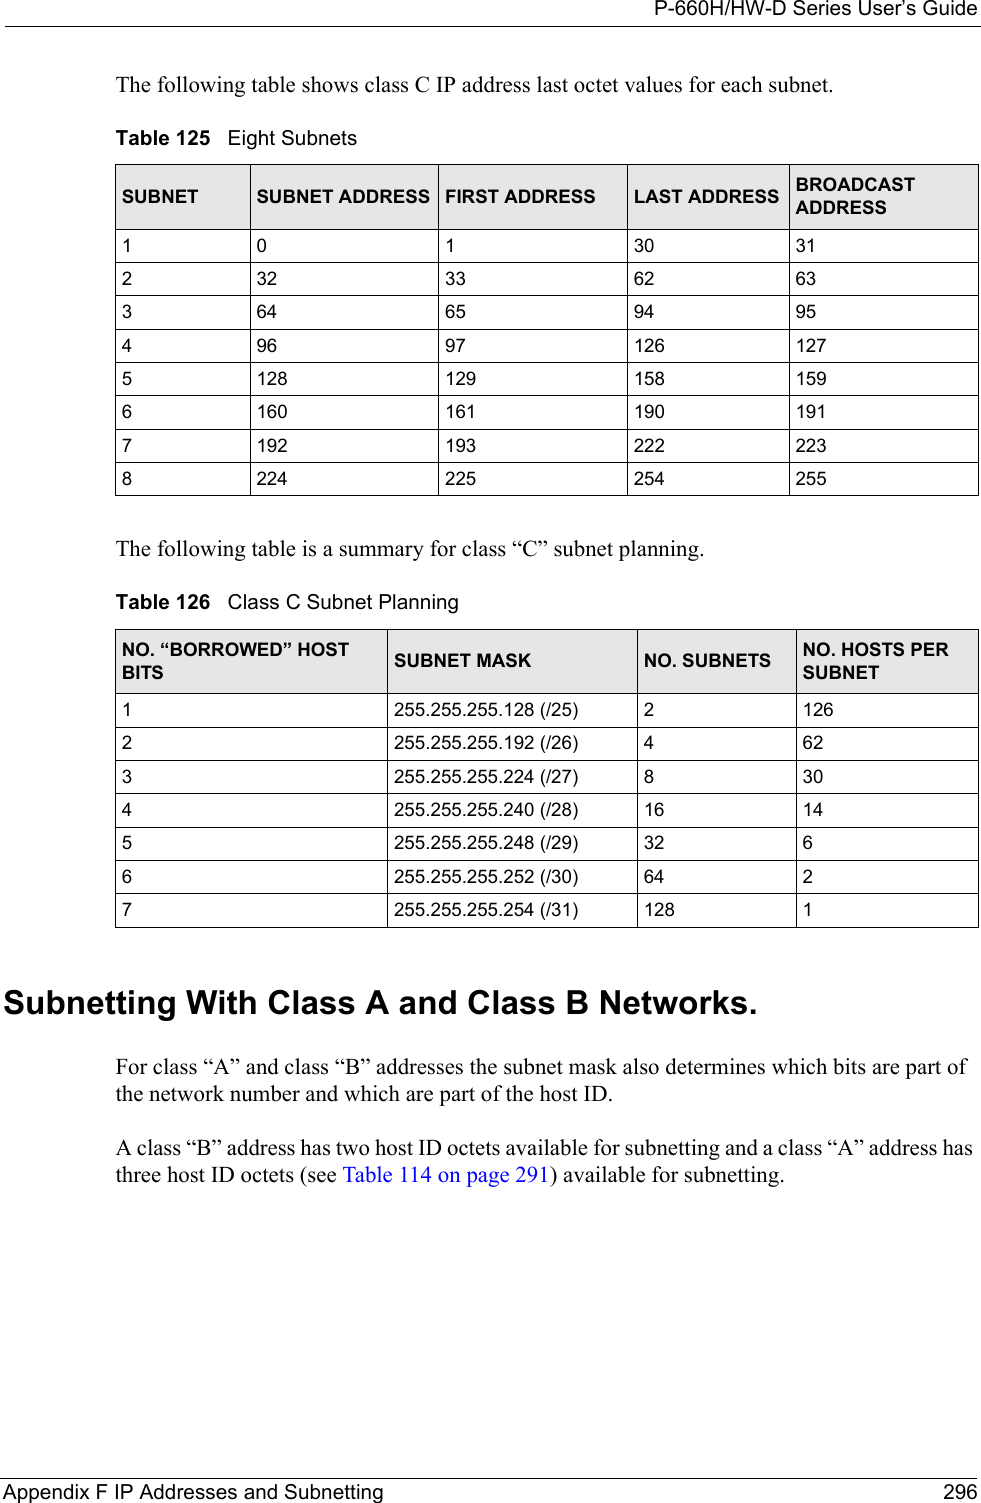 P-660H/HW-D Series User’s GuideAppendix F IP Addresses and Subnetting 296The following table shows class C IP address last octet values for each subnet.The following table is a summary for class “C” subnet planning.Subnetting With Class A and Class B Networks. For class “A” and class “B” addresses the subnet mask also determines which bits are part of the network number and which are part of the host ID. A class “B” address has two host ID octets available for subnetting and a class “A” address has three host ID octets (see Table 114 on page 291) available for subnetting. Table 125   Eight SubnetsSUBNET SUBNET ADDRESS FIRST ADDRESS LAST ADDRESS BROADCAST ADDRESS1 0 1 30 31232 33 62 63364 65 94 95496 97 126 1275128 129 158 1596160 161 190 1917192 193 222 2238224 225 254 255Table 126   Class C Subnet PlanningNO. “BORROWED” HOST BITS SUBNET MASK NO. SUBNETS NO. HOSTS PER SUBNET1255.255.255.128 (/25) 21262255.255.255.192 (/26) 4623255.255.255.224 (/27) 8304255.255.255.240 (/28) 16 145255.255.255.248 (/29) 32 66255.255.255.252 (/30) 64 27255.255.255.254 (/31) 128 1